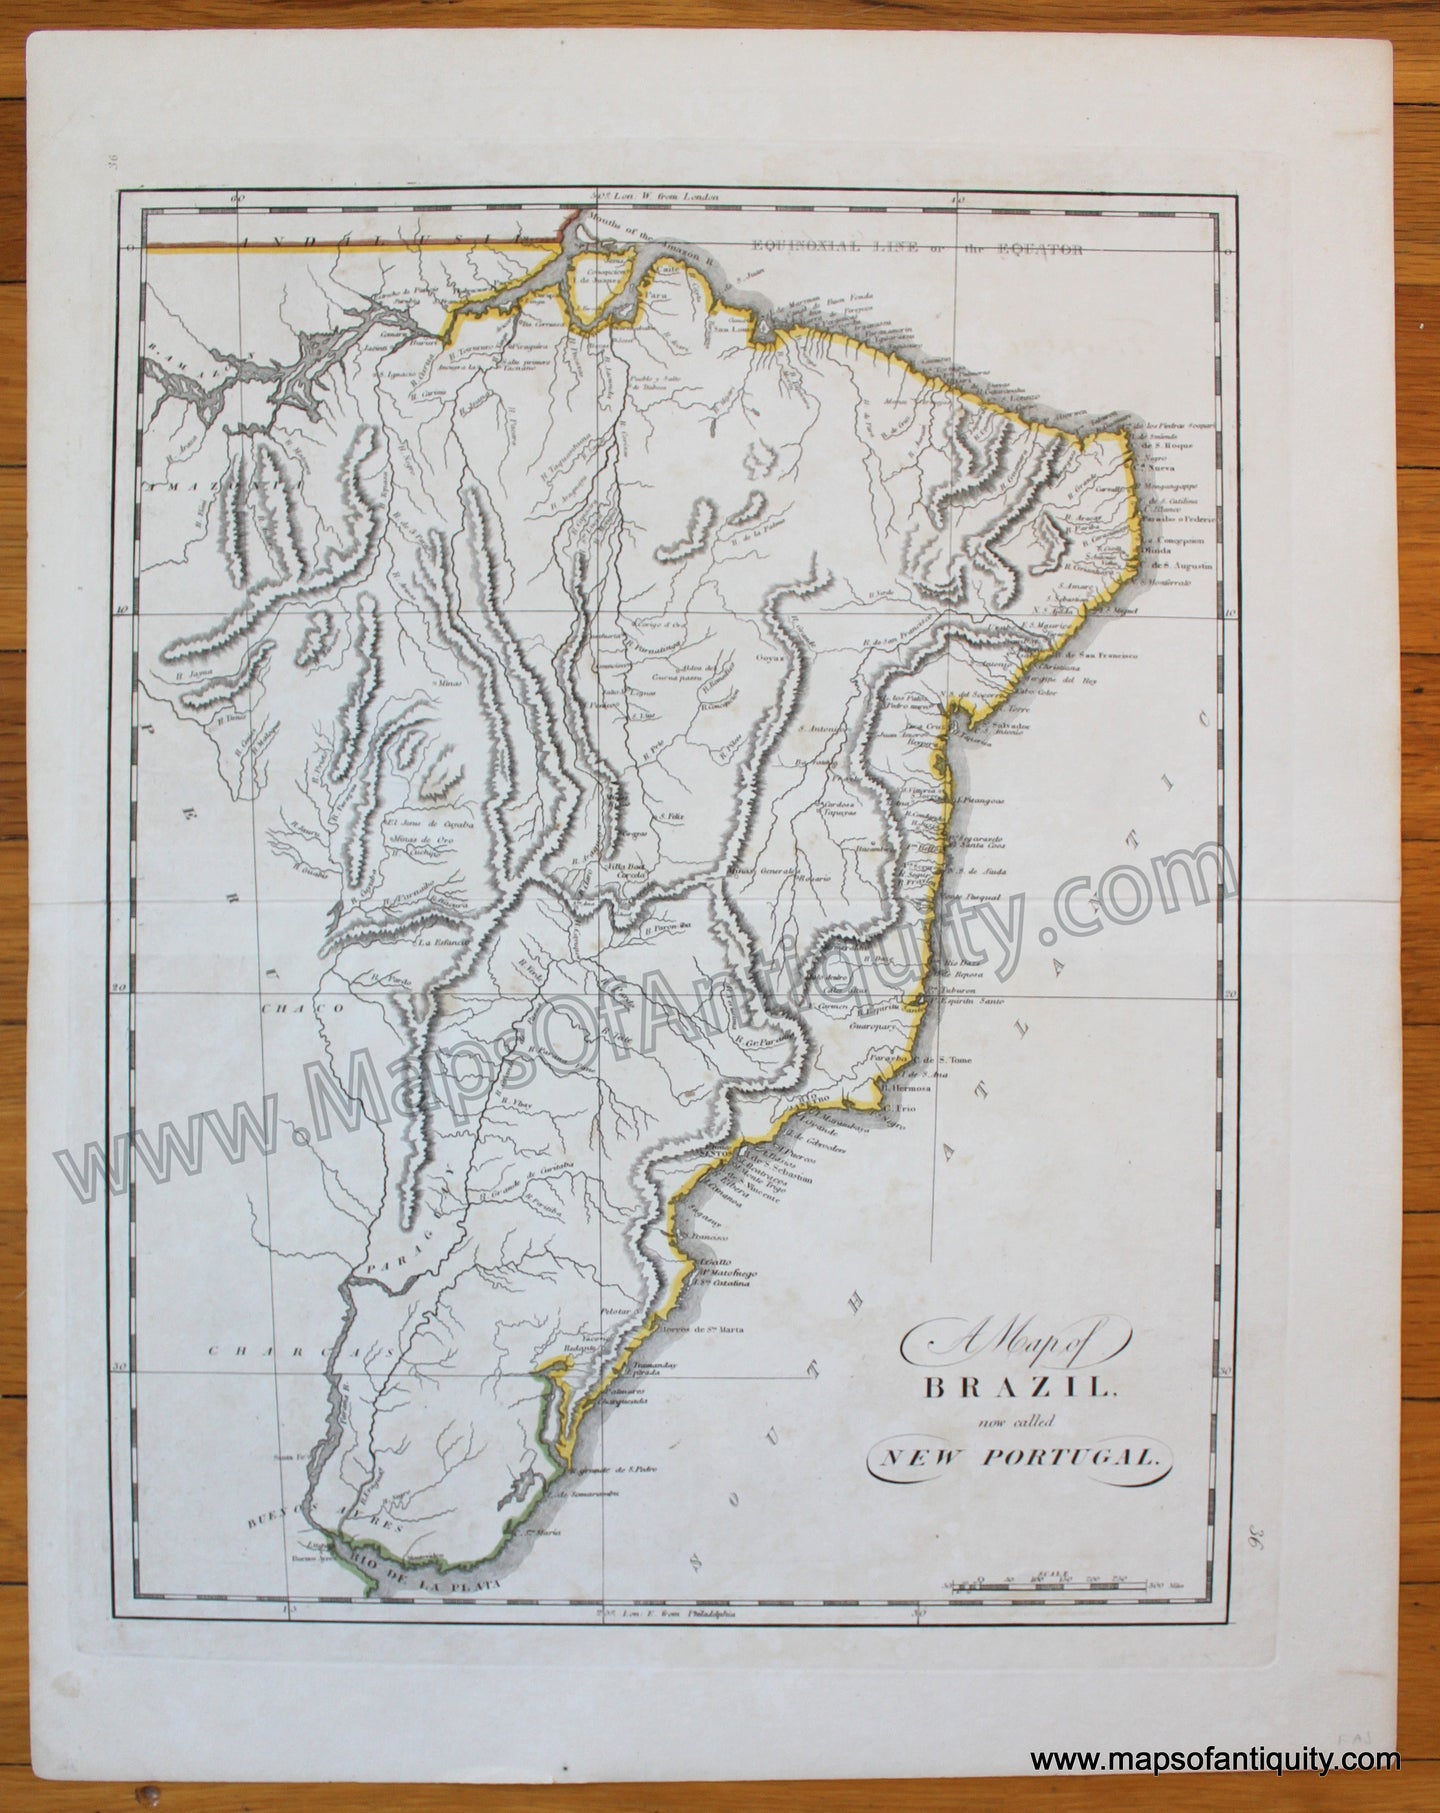 Antique-Map-A-Map-of-Brazil-now-called-New-Portugal-Maps-of-Antiquity